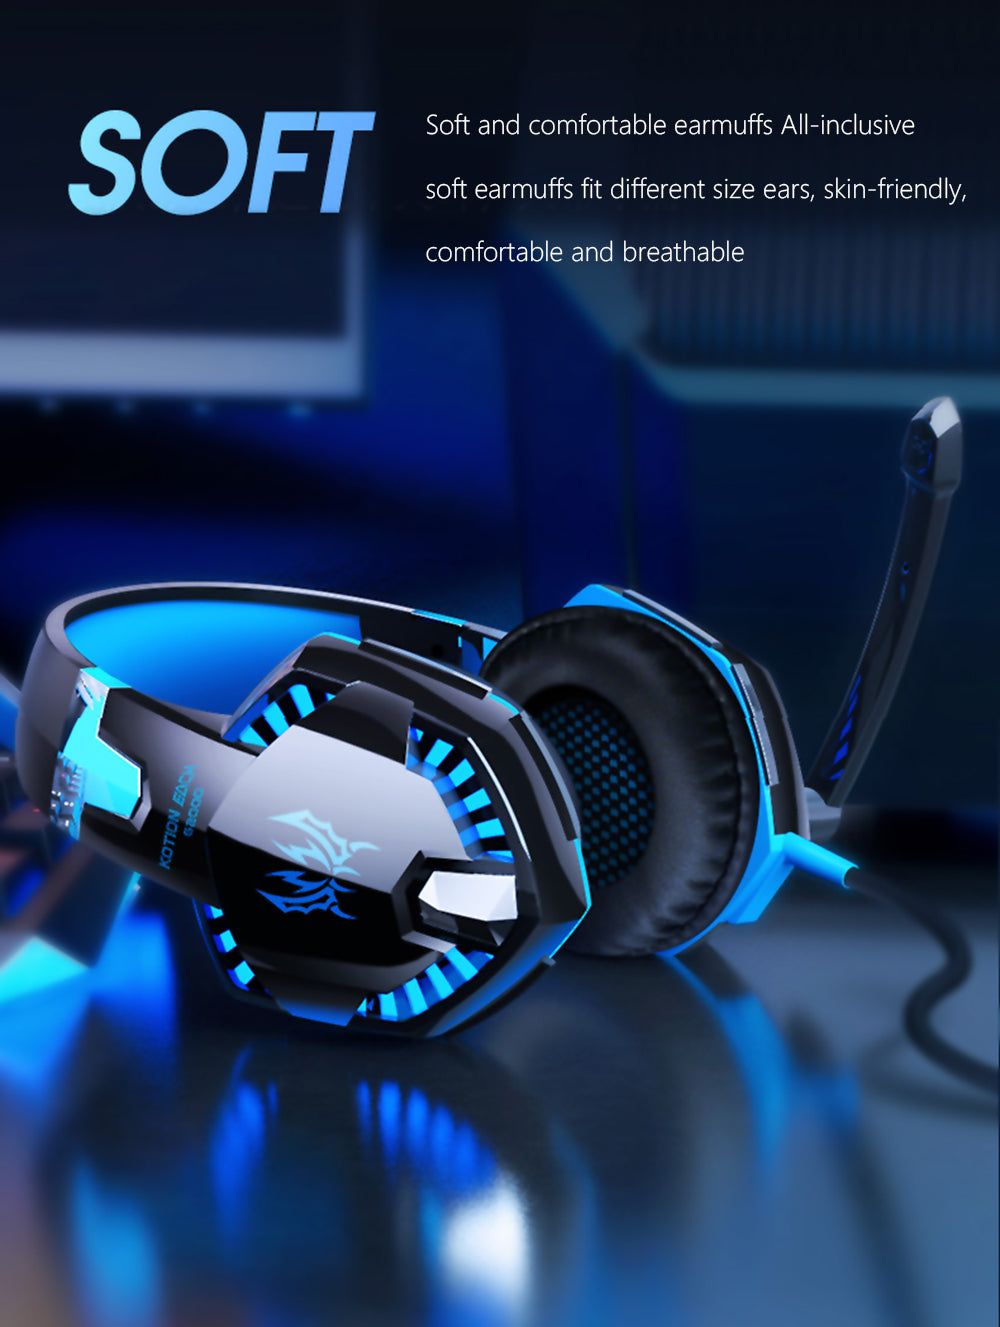 Gaming Headset Model G9000 With Deep Bass and 7.1 Surround 0 | Hifi Media Store